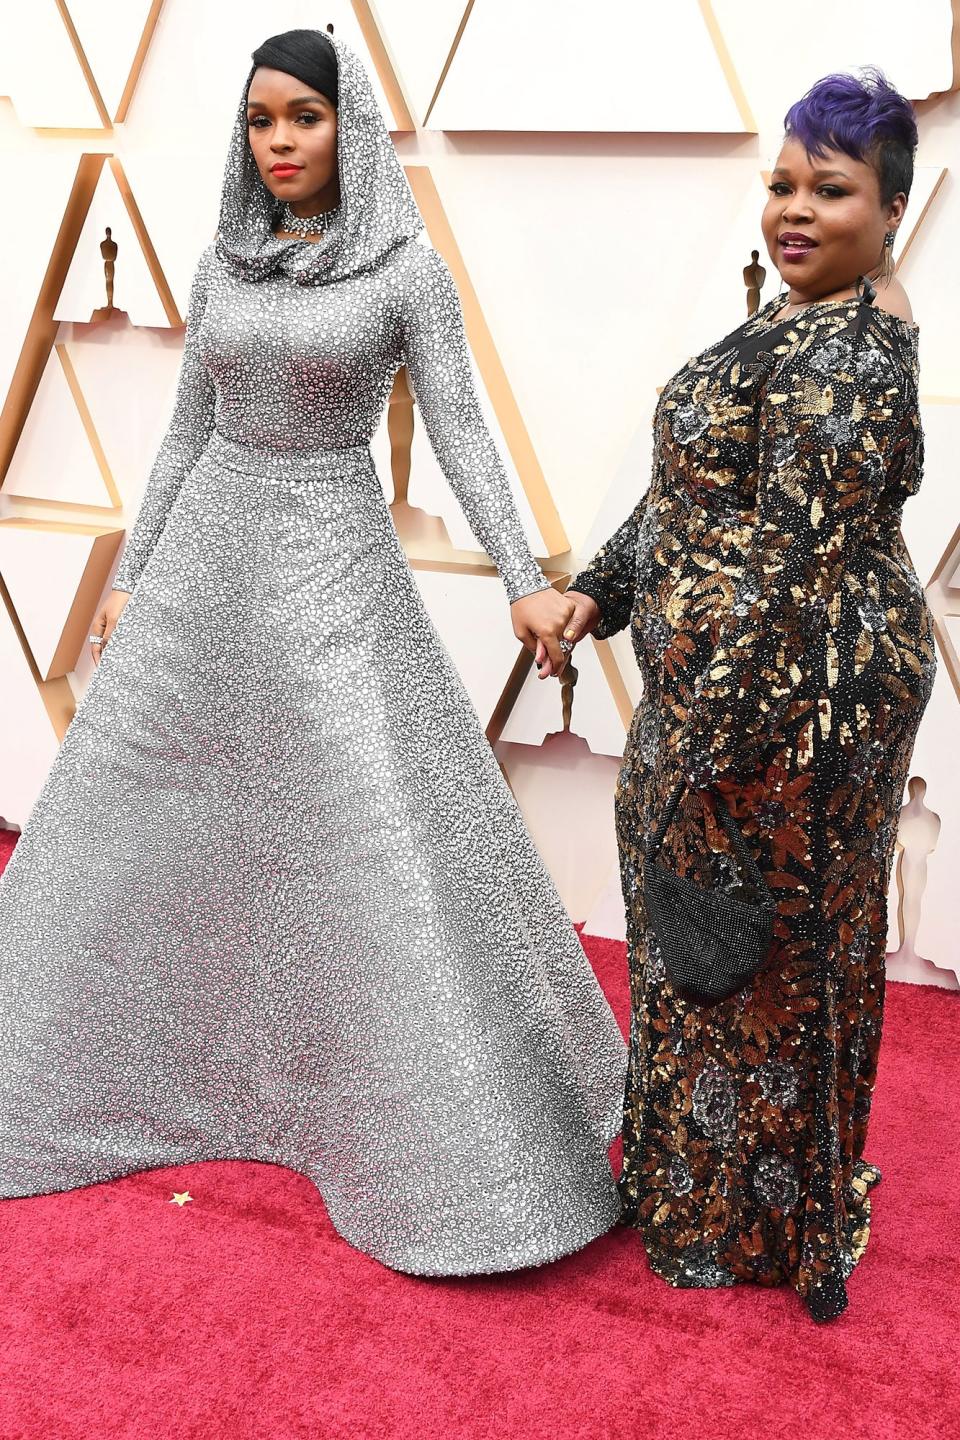 Janelle Monáe and Janet